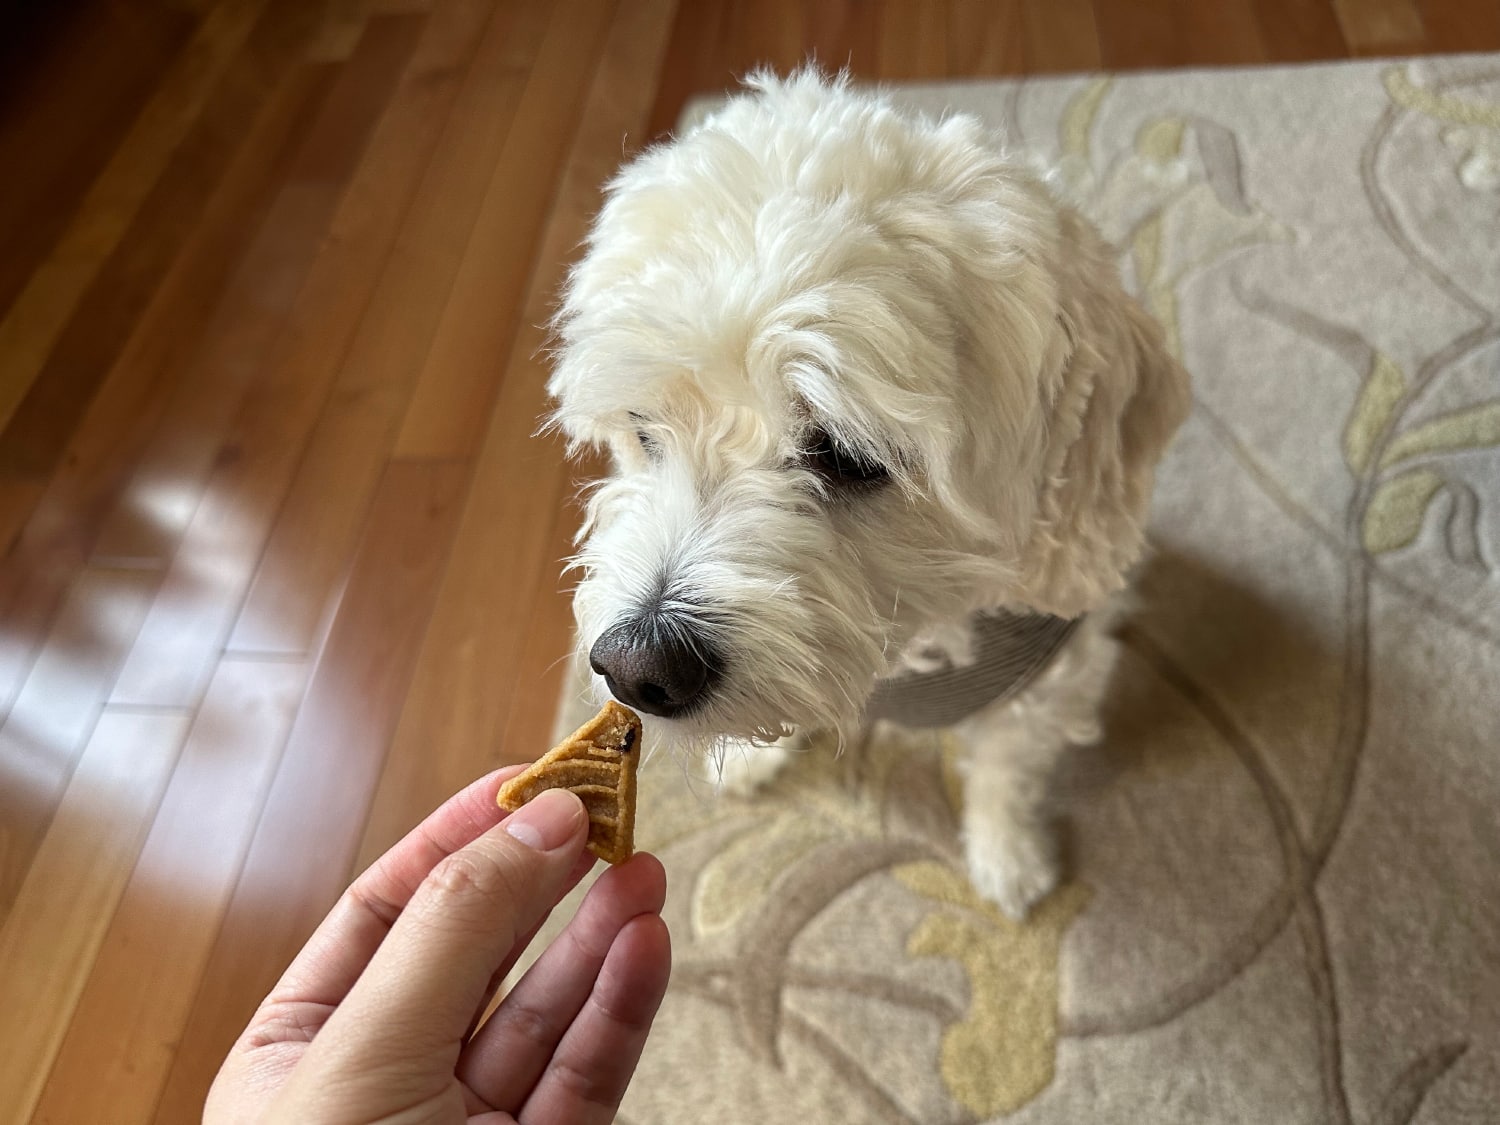 PetFriendly - nora eating the treat